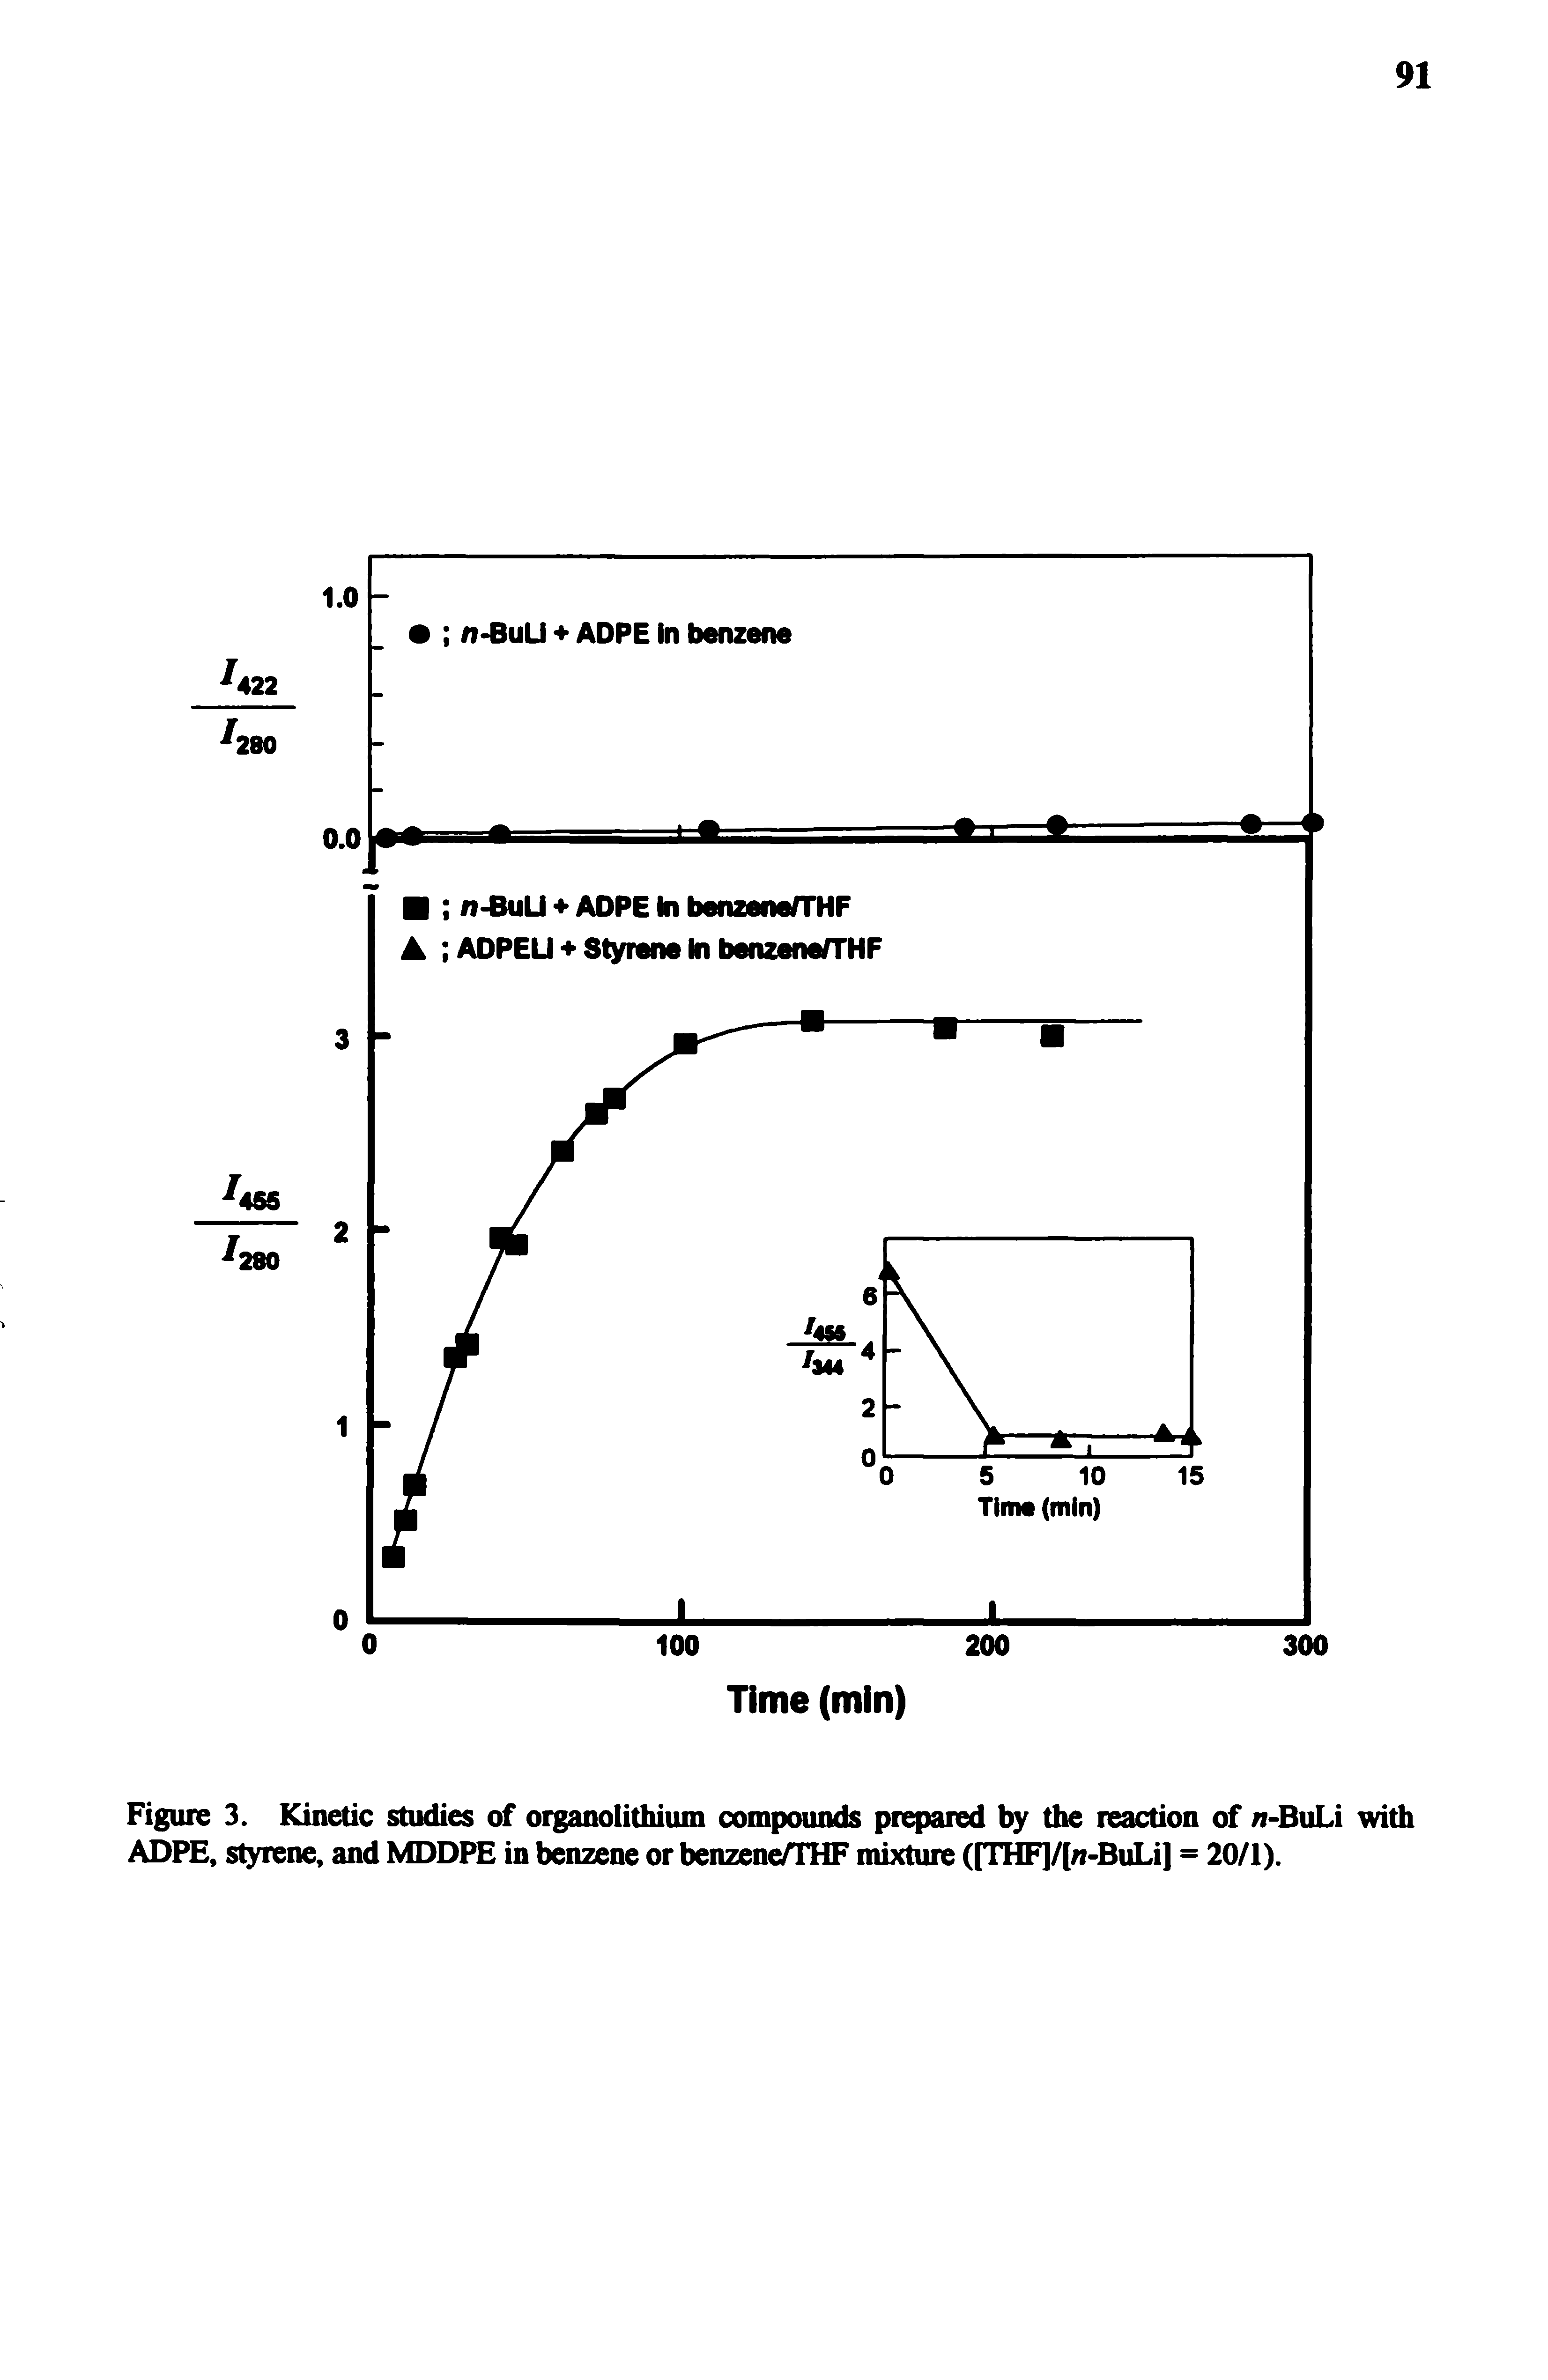 Figure 3. Kinetic studies of organolithium compounds prepared by the reaction of /i-BuLi with ADPE, styrene, and MDDPE in benzene or benzene/THF mixture ([THF]/[/f-BuLi] = 20/1).